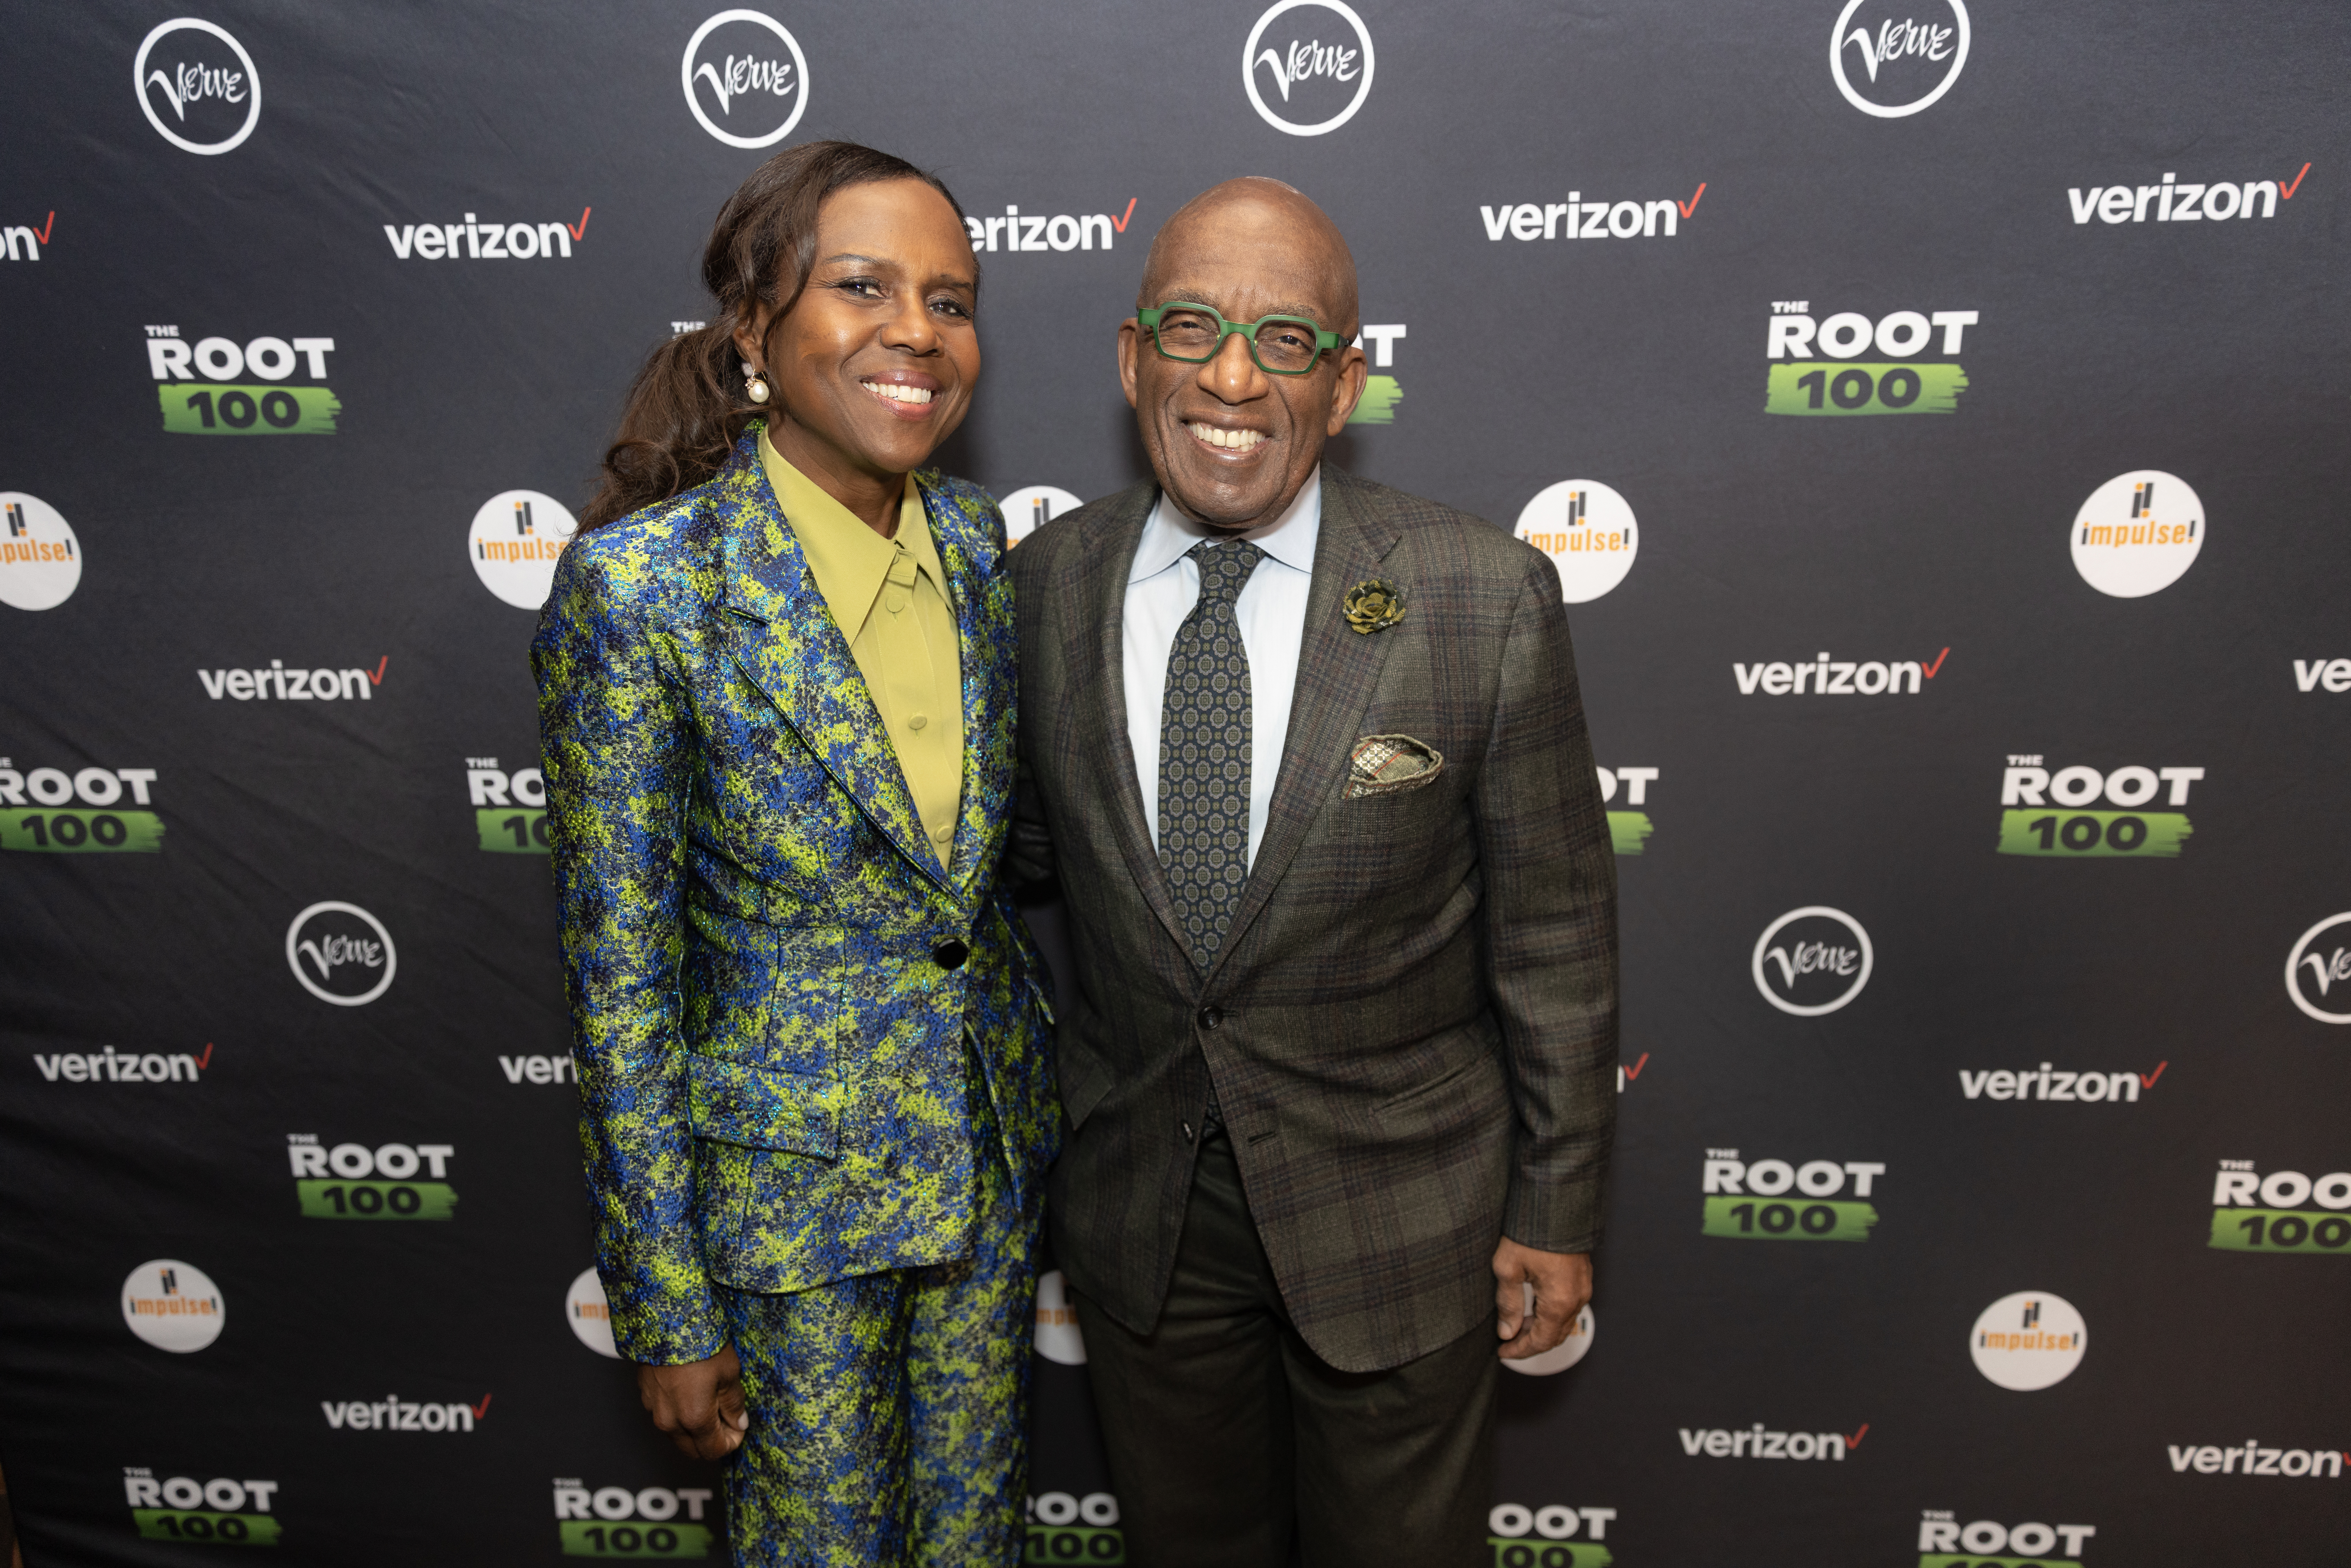 Al and his wife Deborah Roberts recently enjoyed a romantic date night in New York City